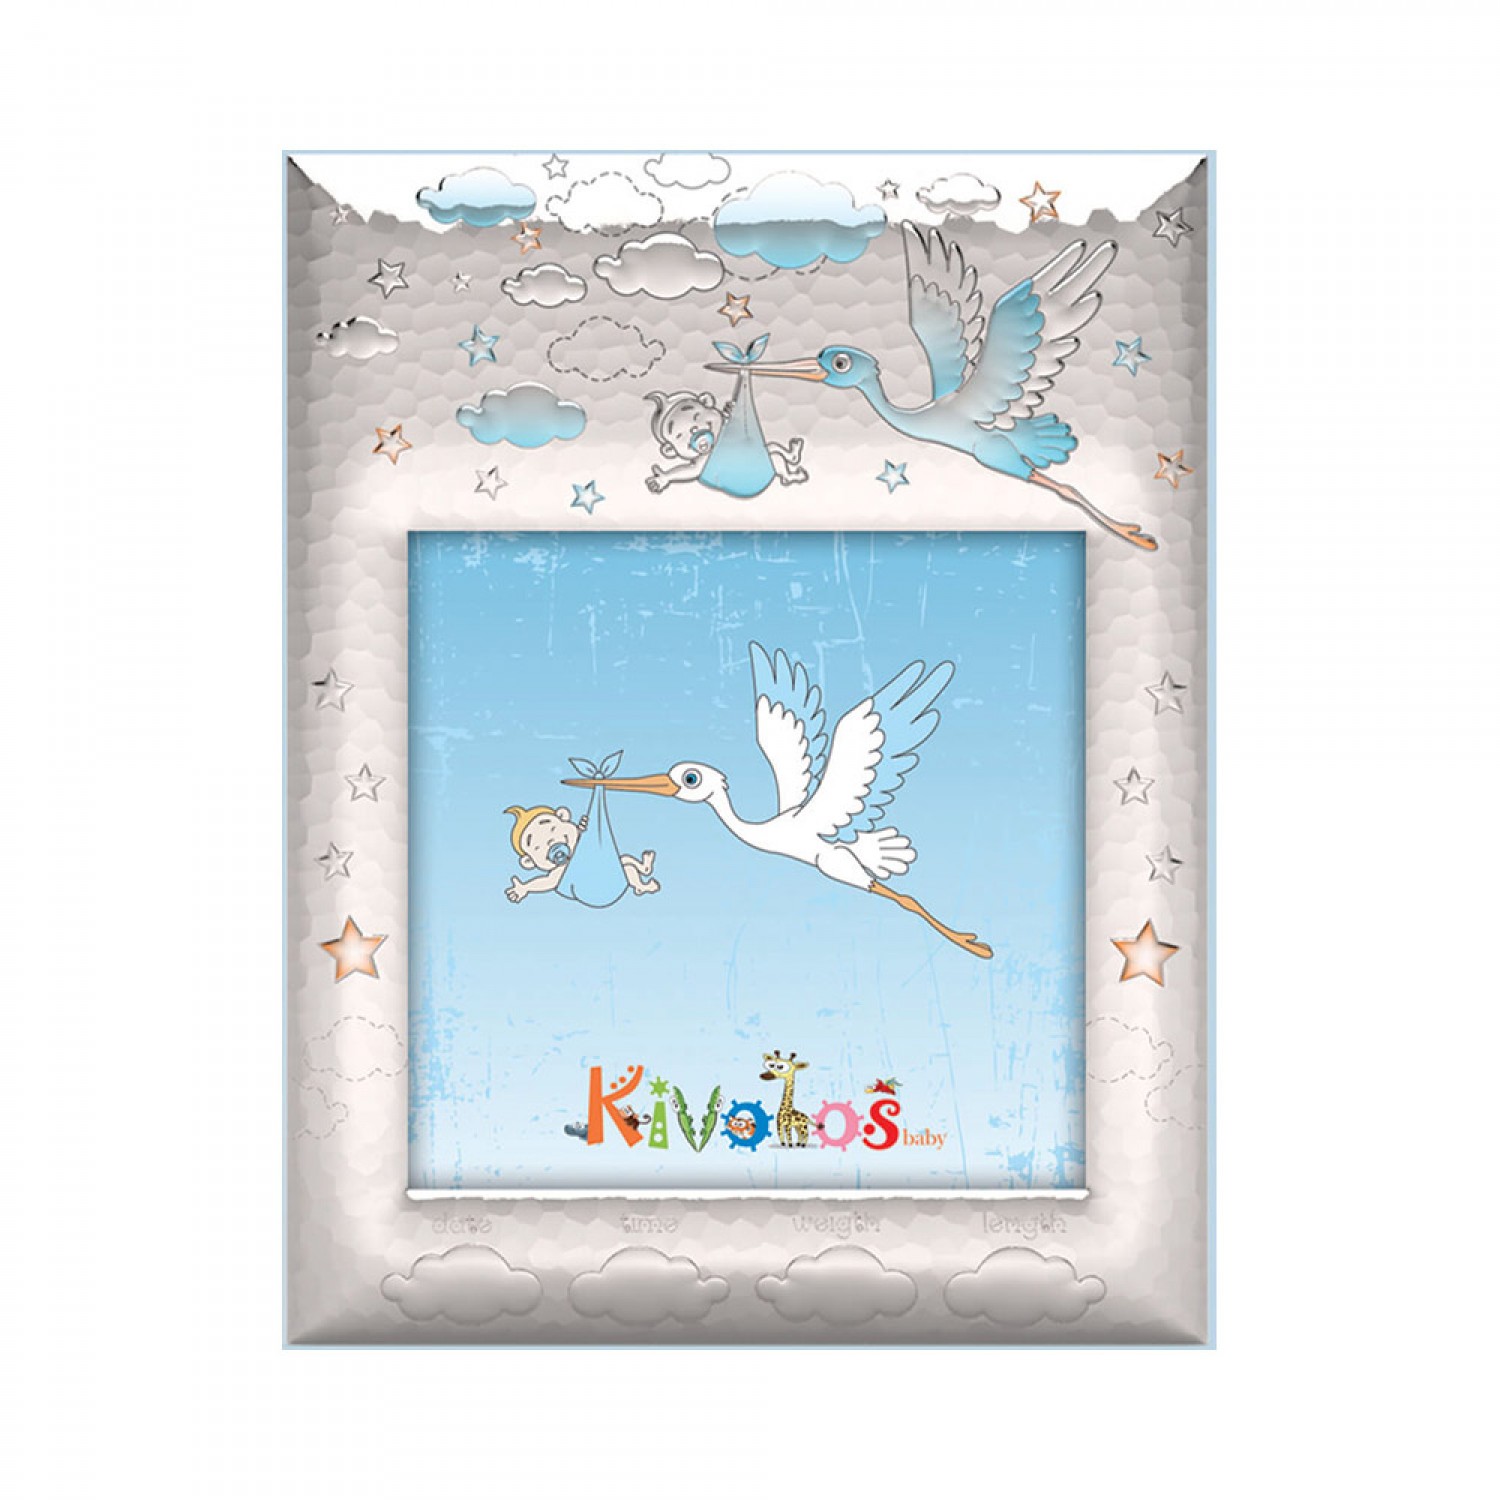 Childrens frame for boy with stork and clouds 10X10.